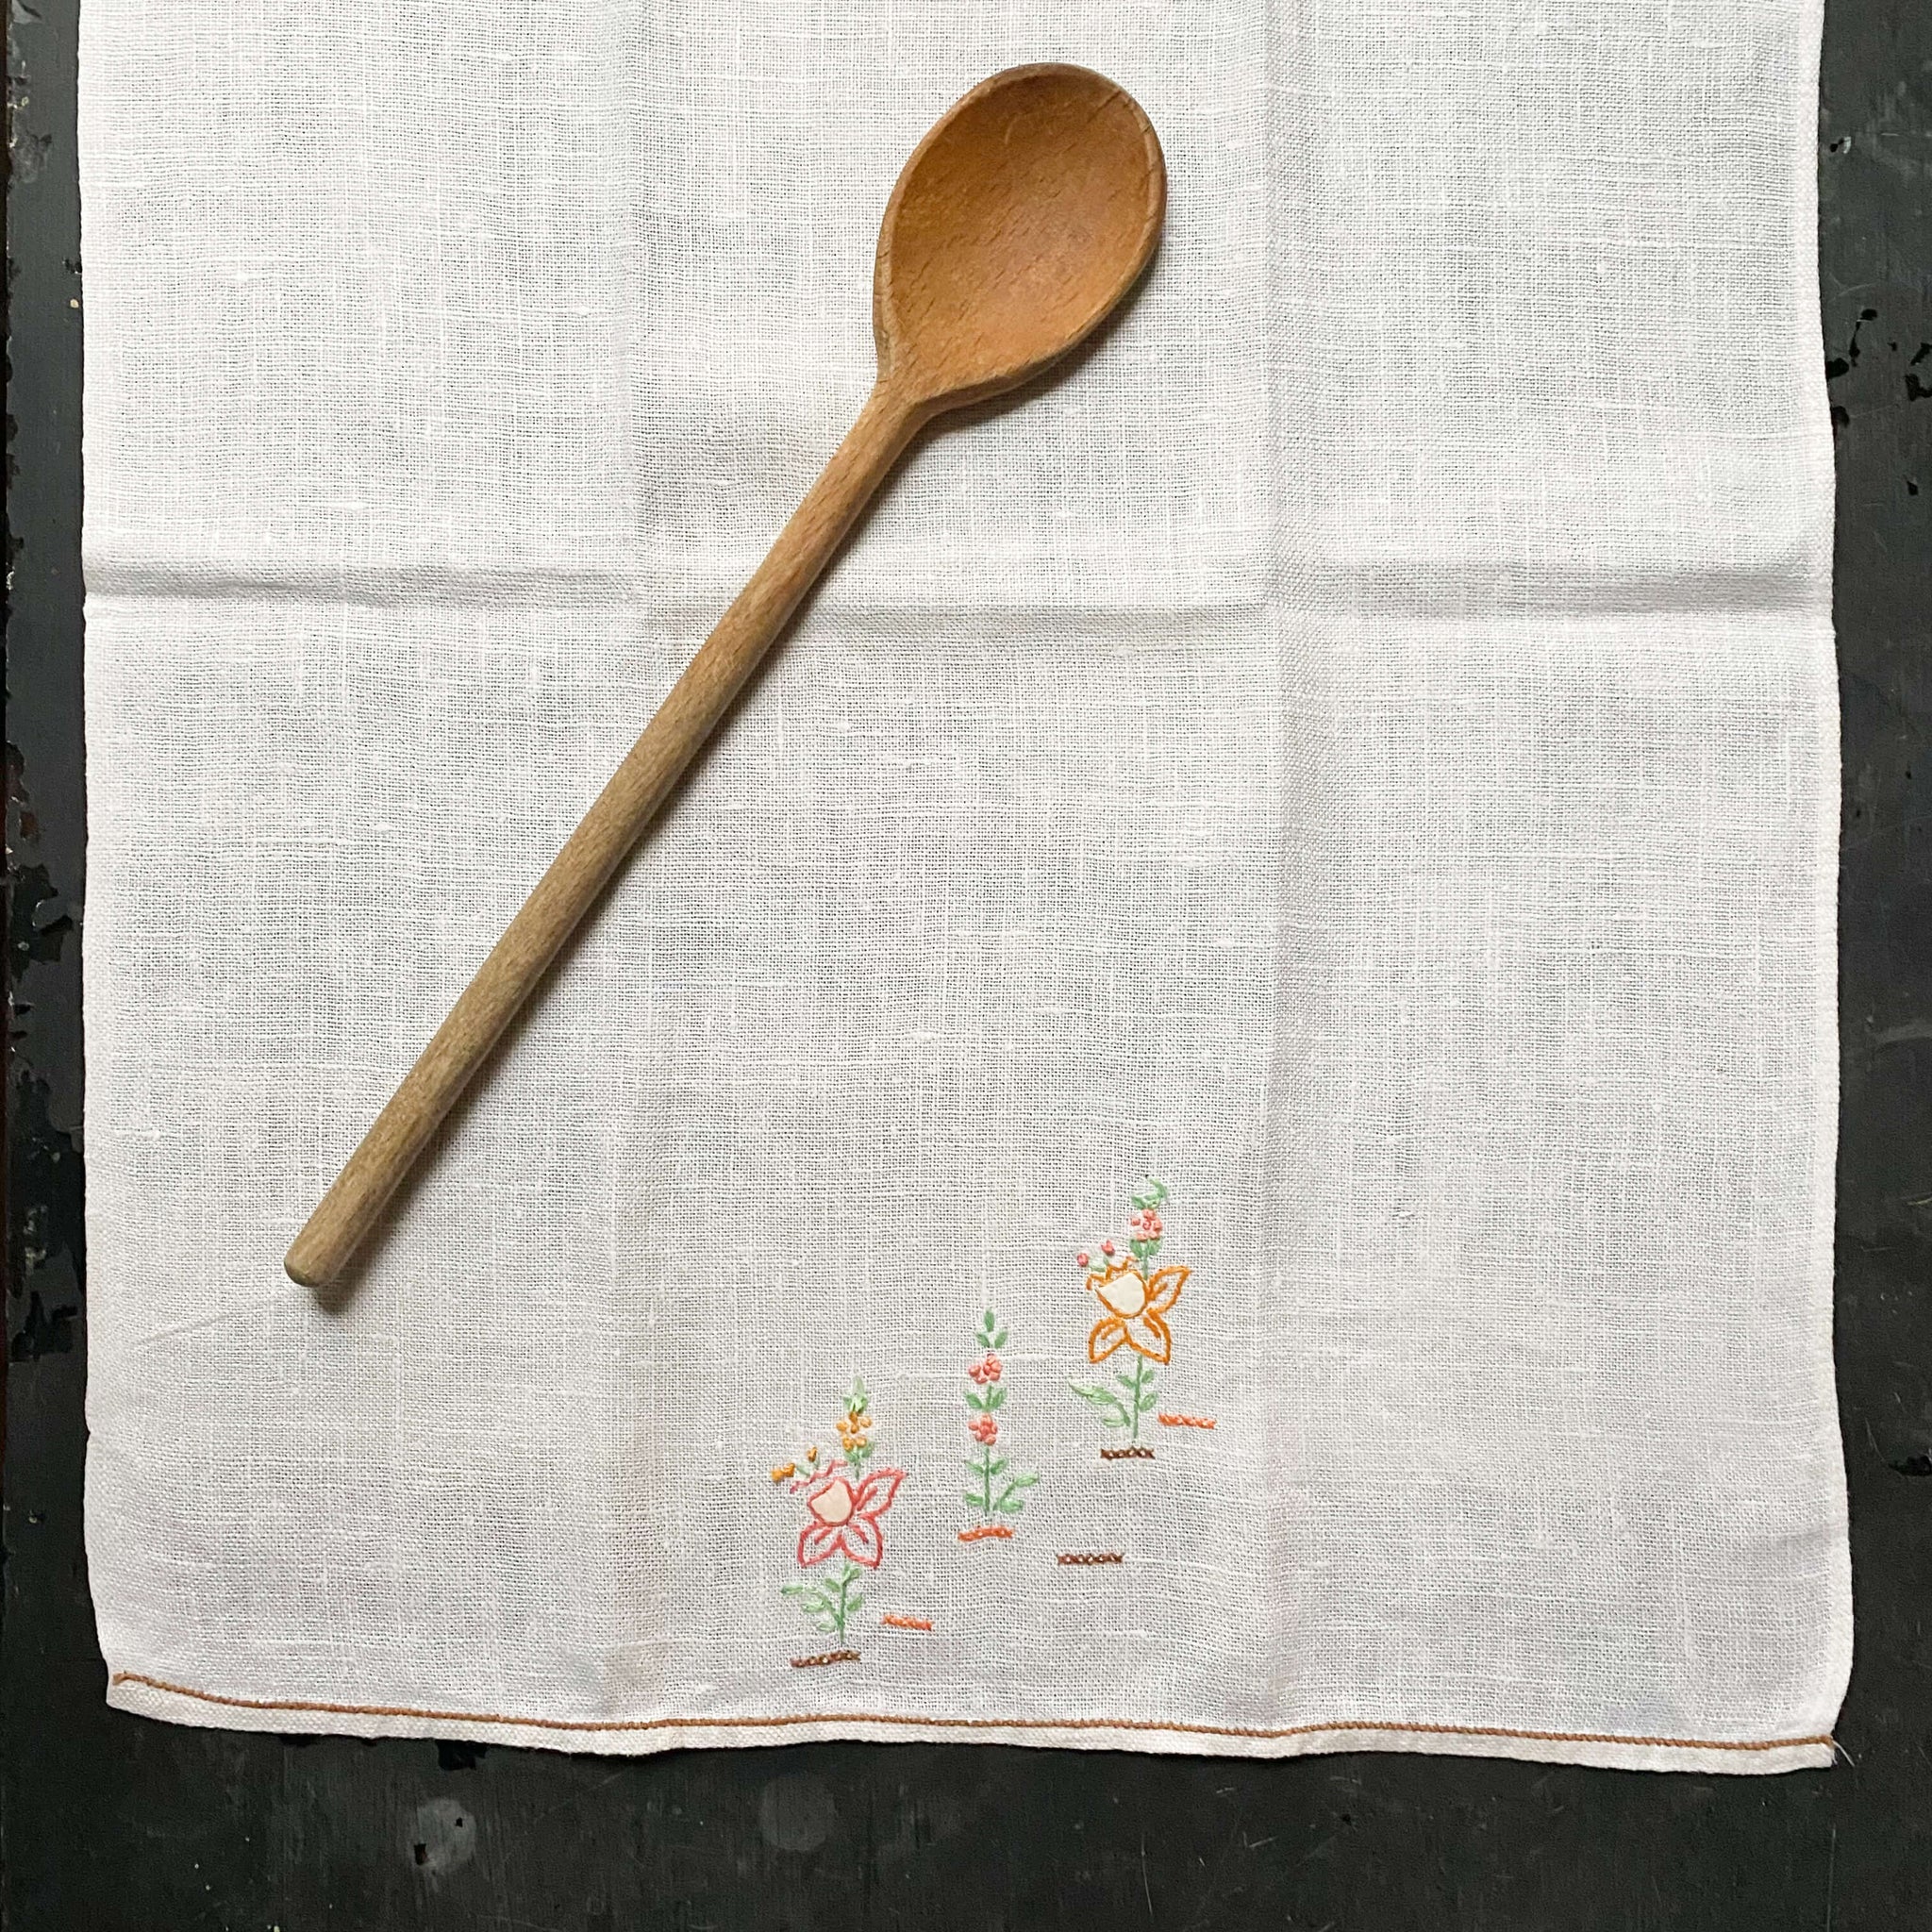 Vintage Embroidered Kitchen Linen Tea Towel with Daffodil Flowers